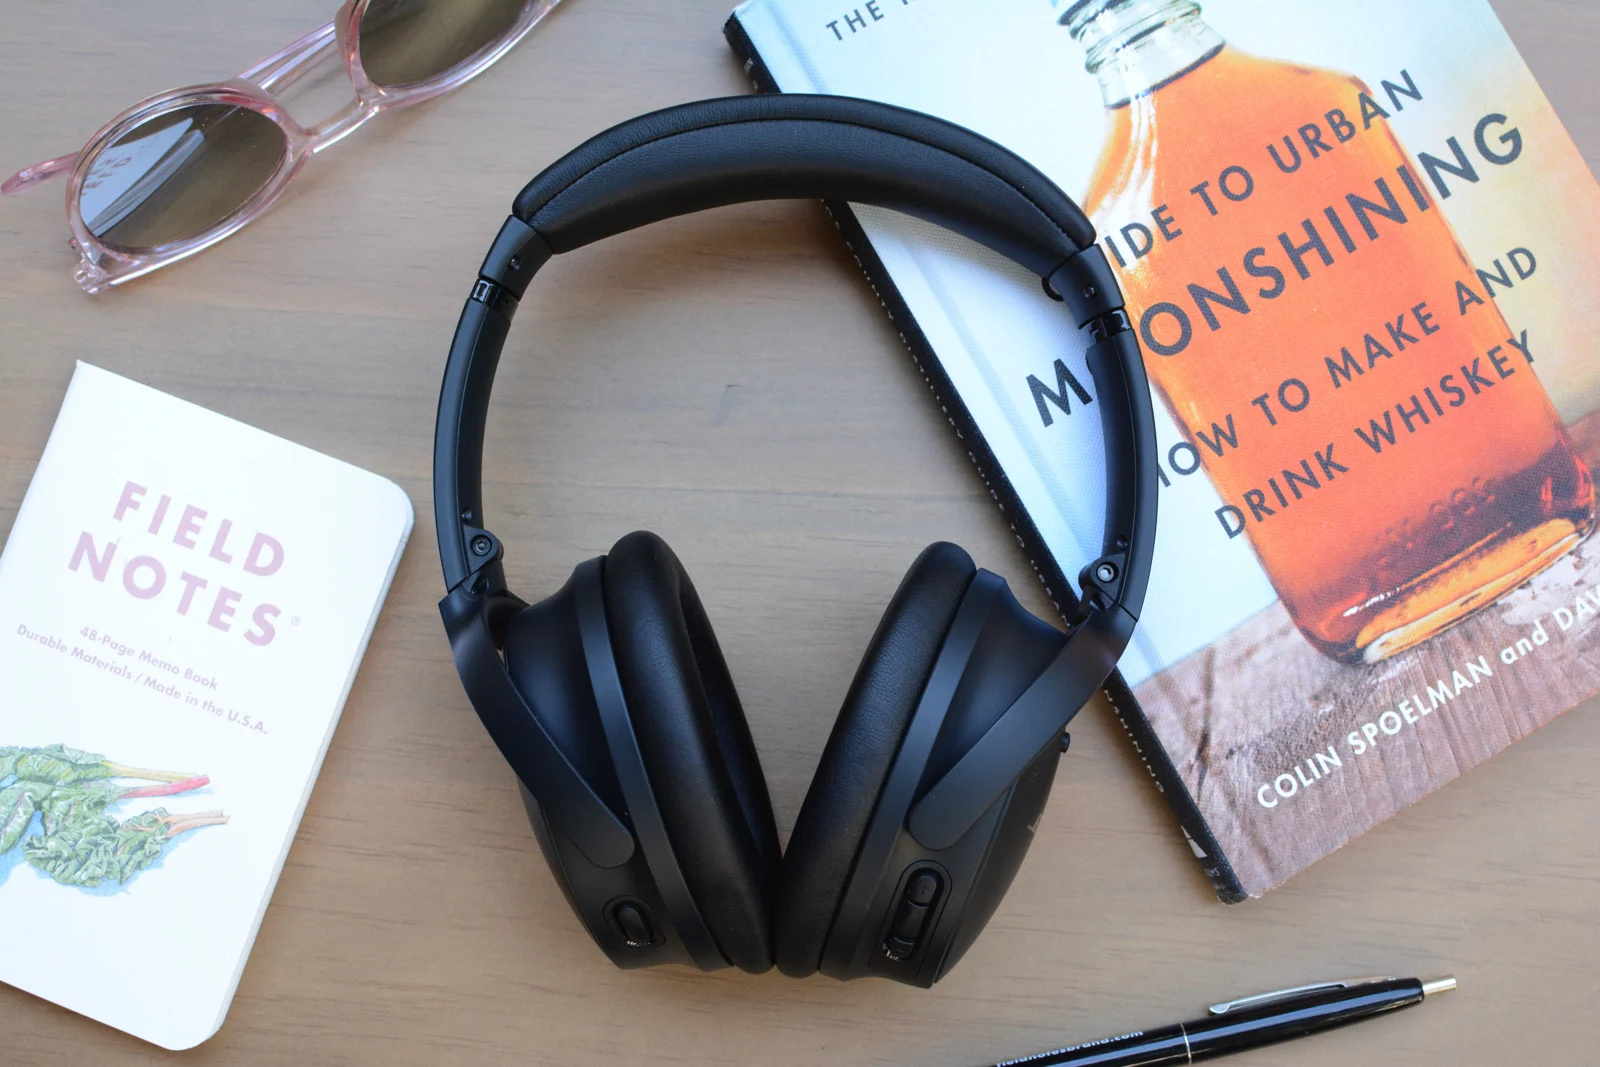 With the latest installment in its popular QuietComfort lineup, Bose revisits some of its best headphones ever with timely upgrades.